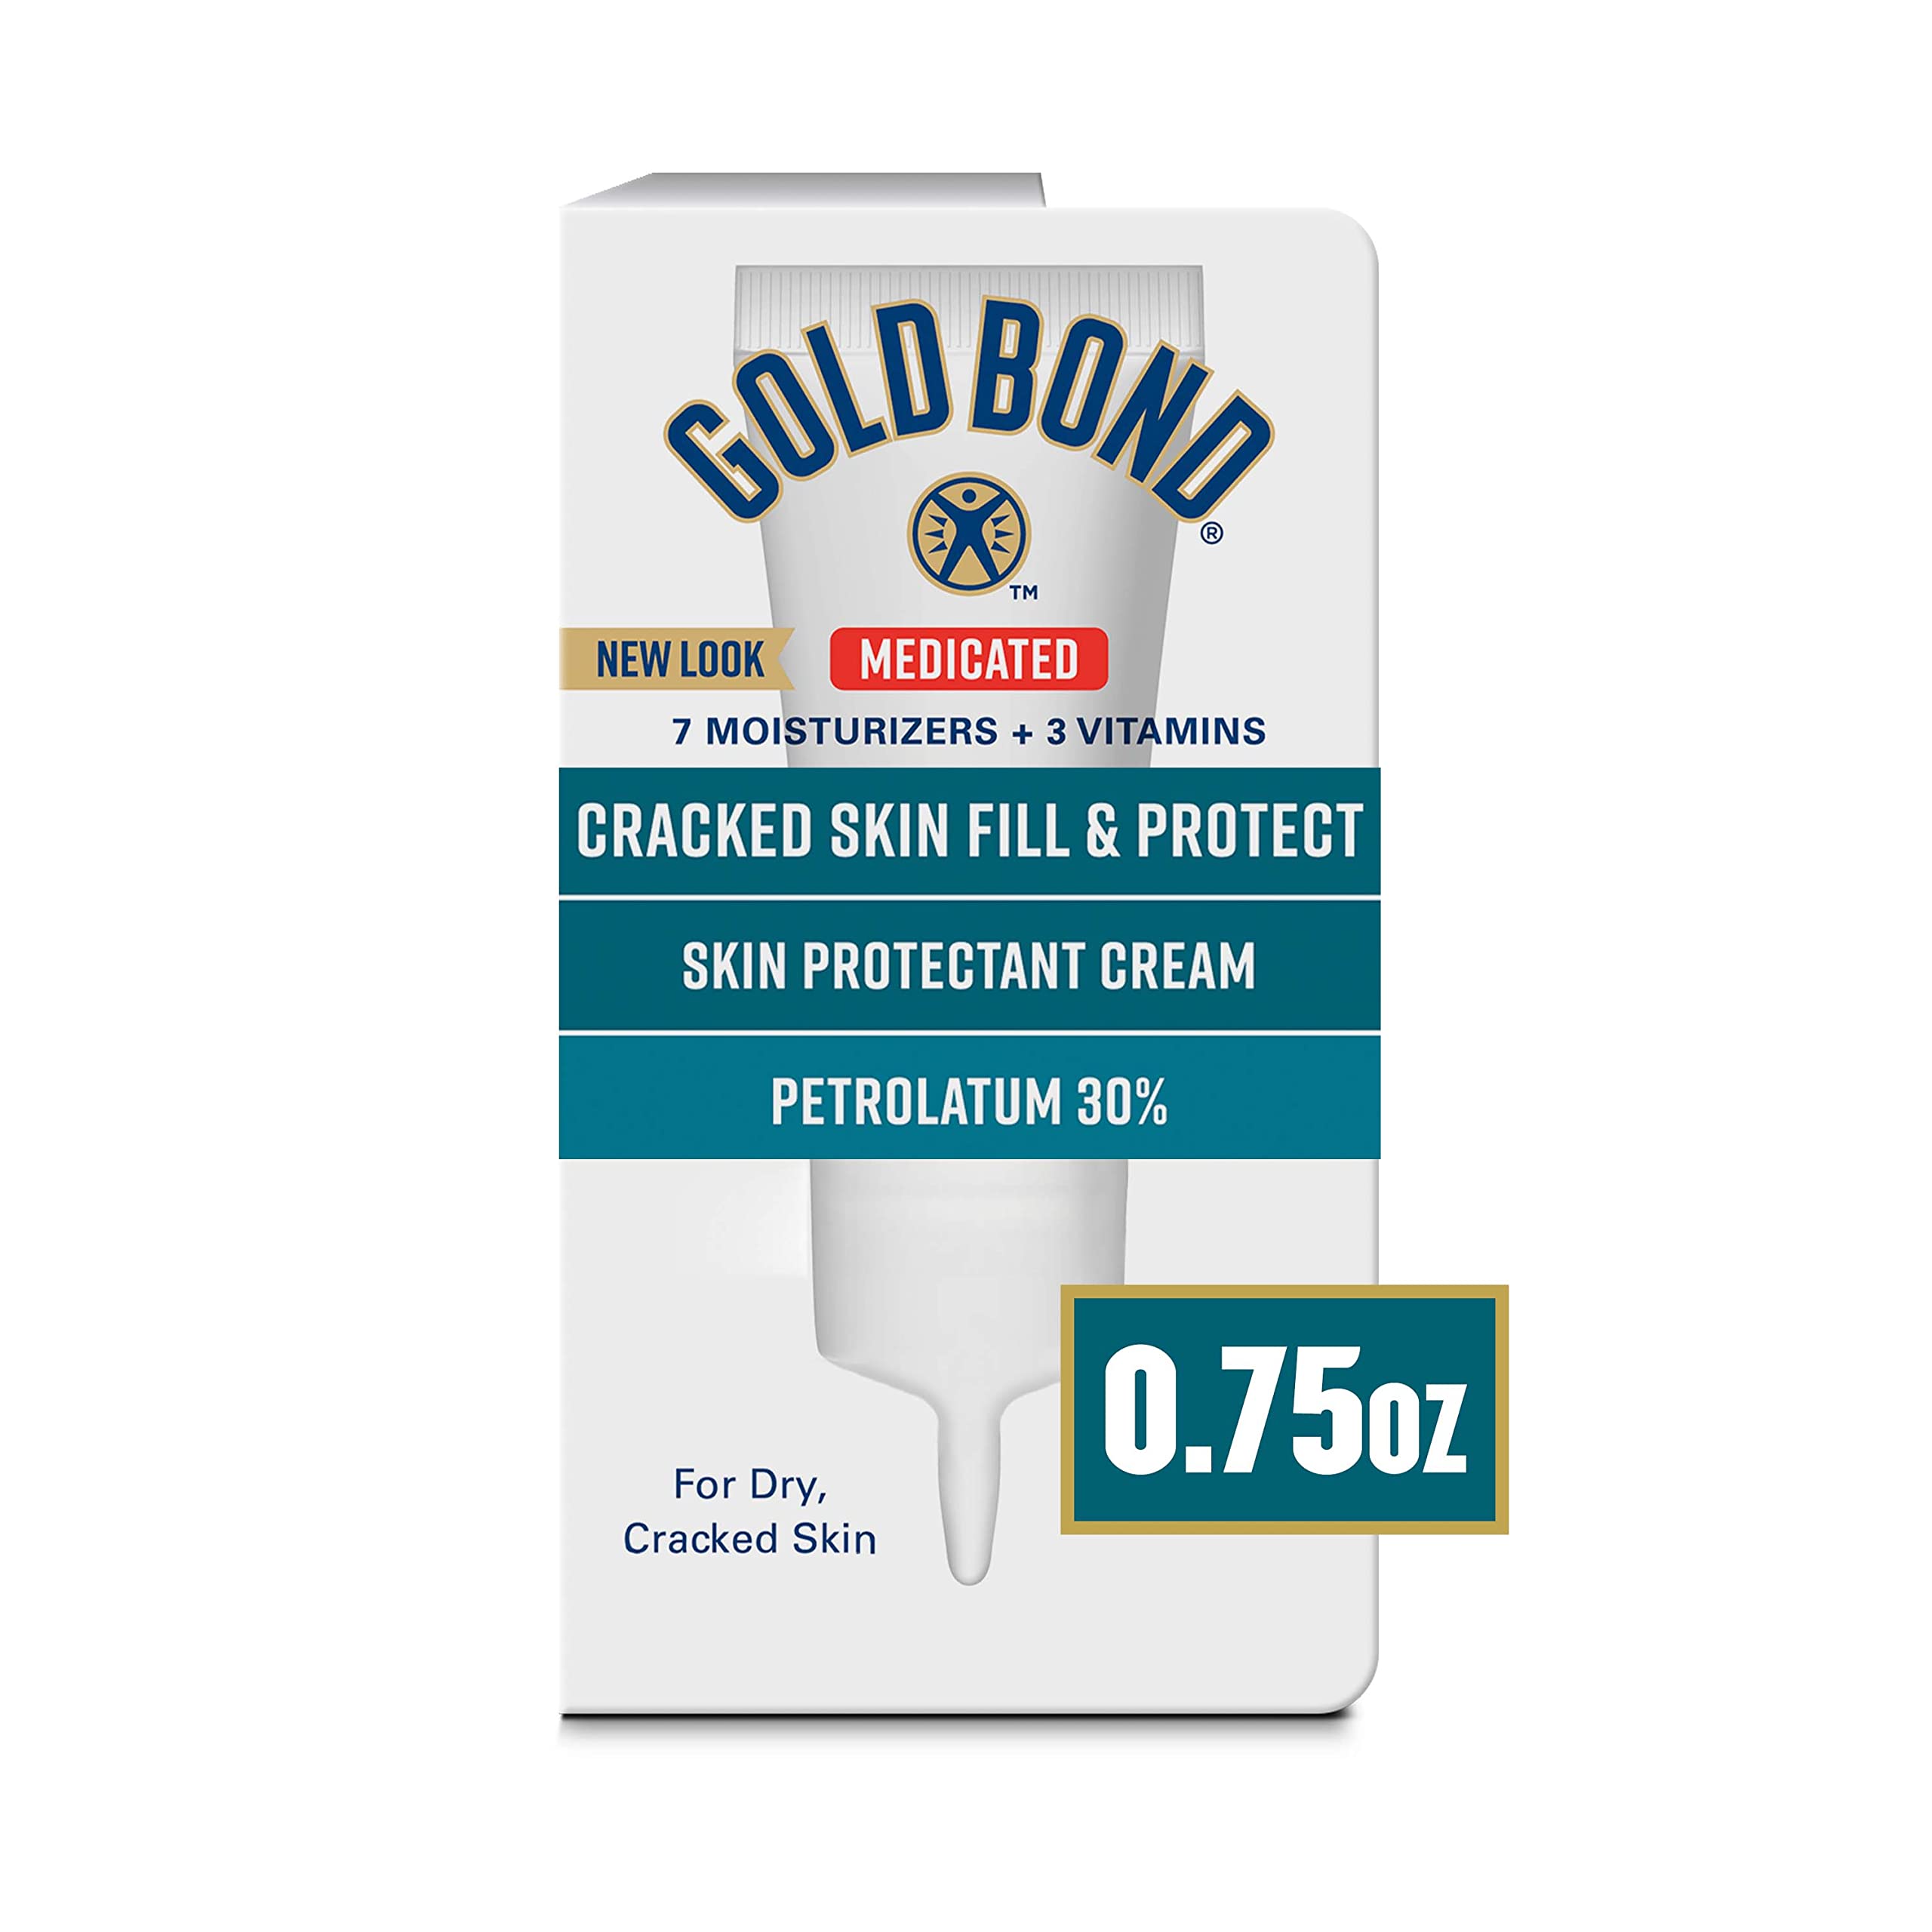 Gold Bond Ultimate Cracked Skin Relief Fill & Protect Cream for Hands, Cuticles, and Feet, 0.75 Ounce (Pack of 1), Blue